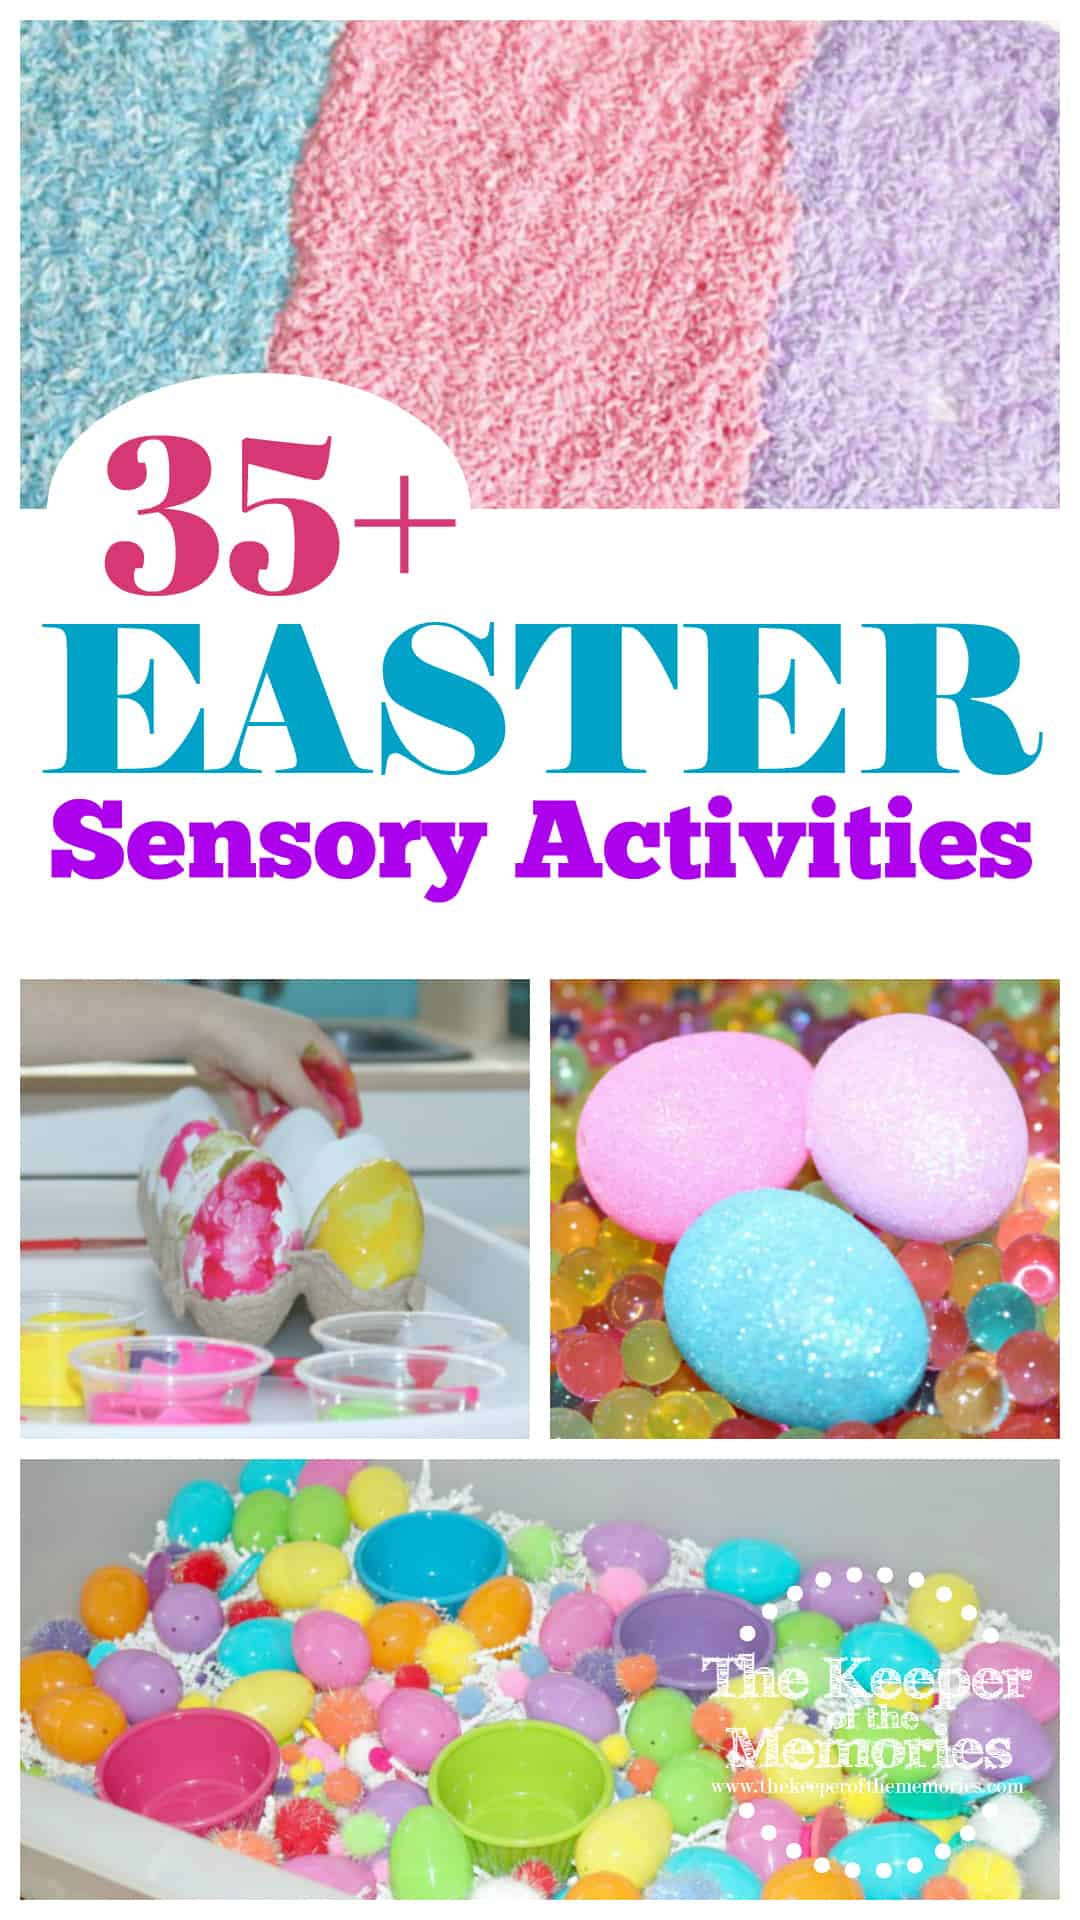 Easter Games And Activities
 35 Easter Sensory Activities for Little Kids The Keeper